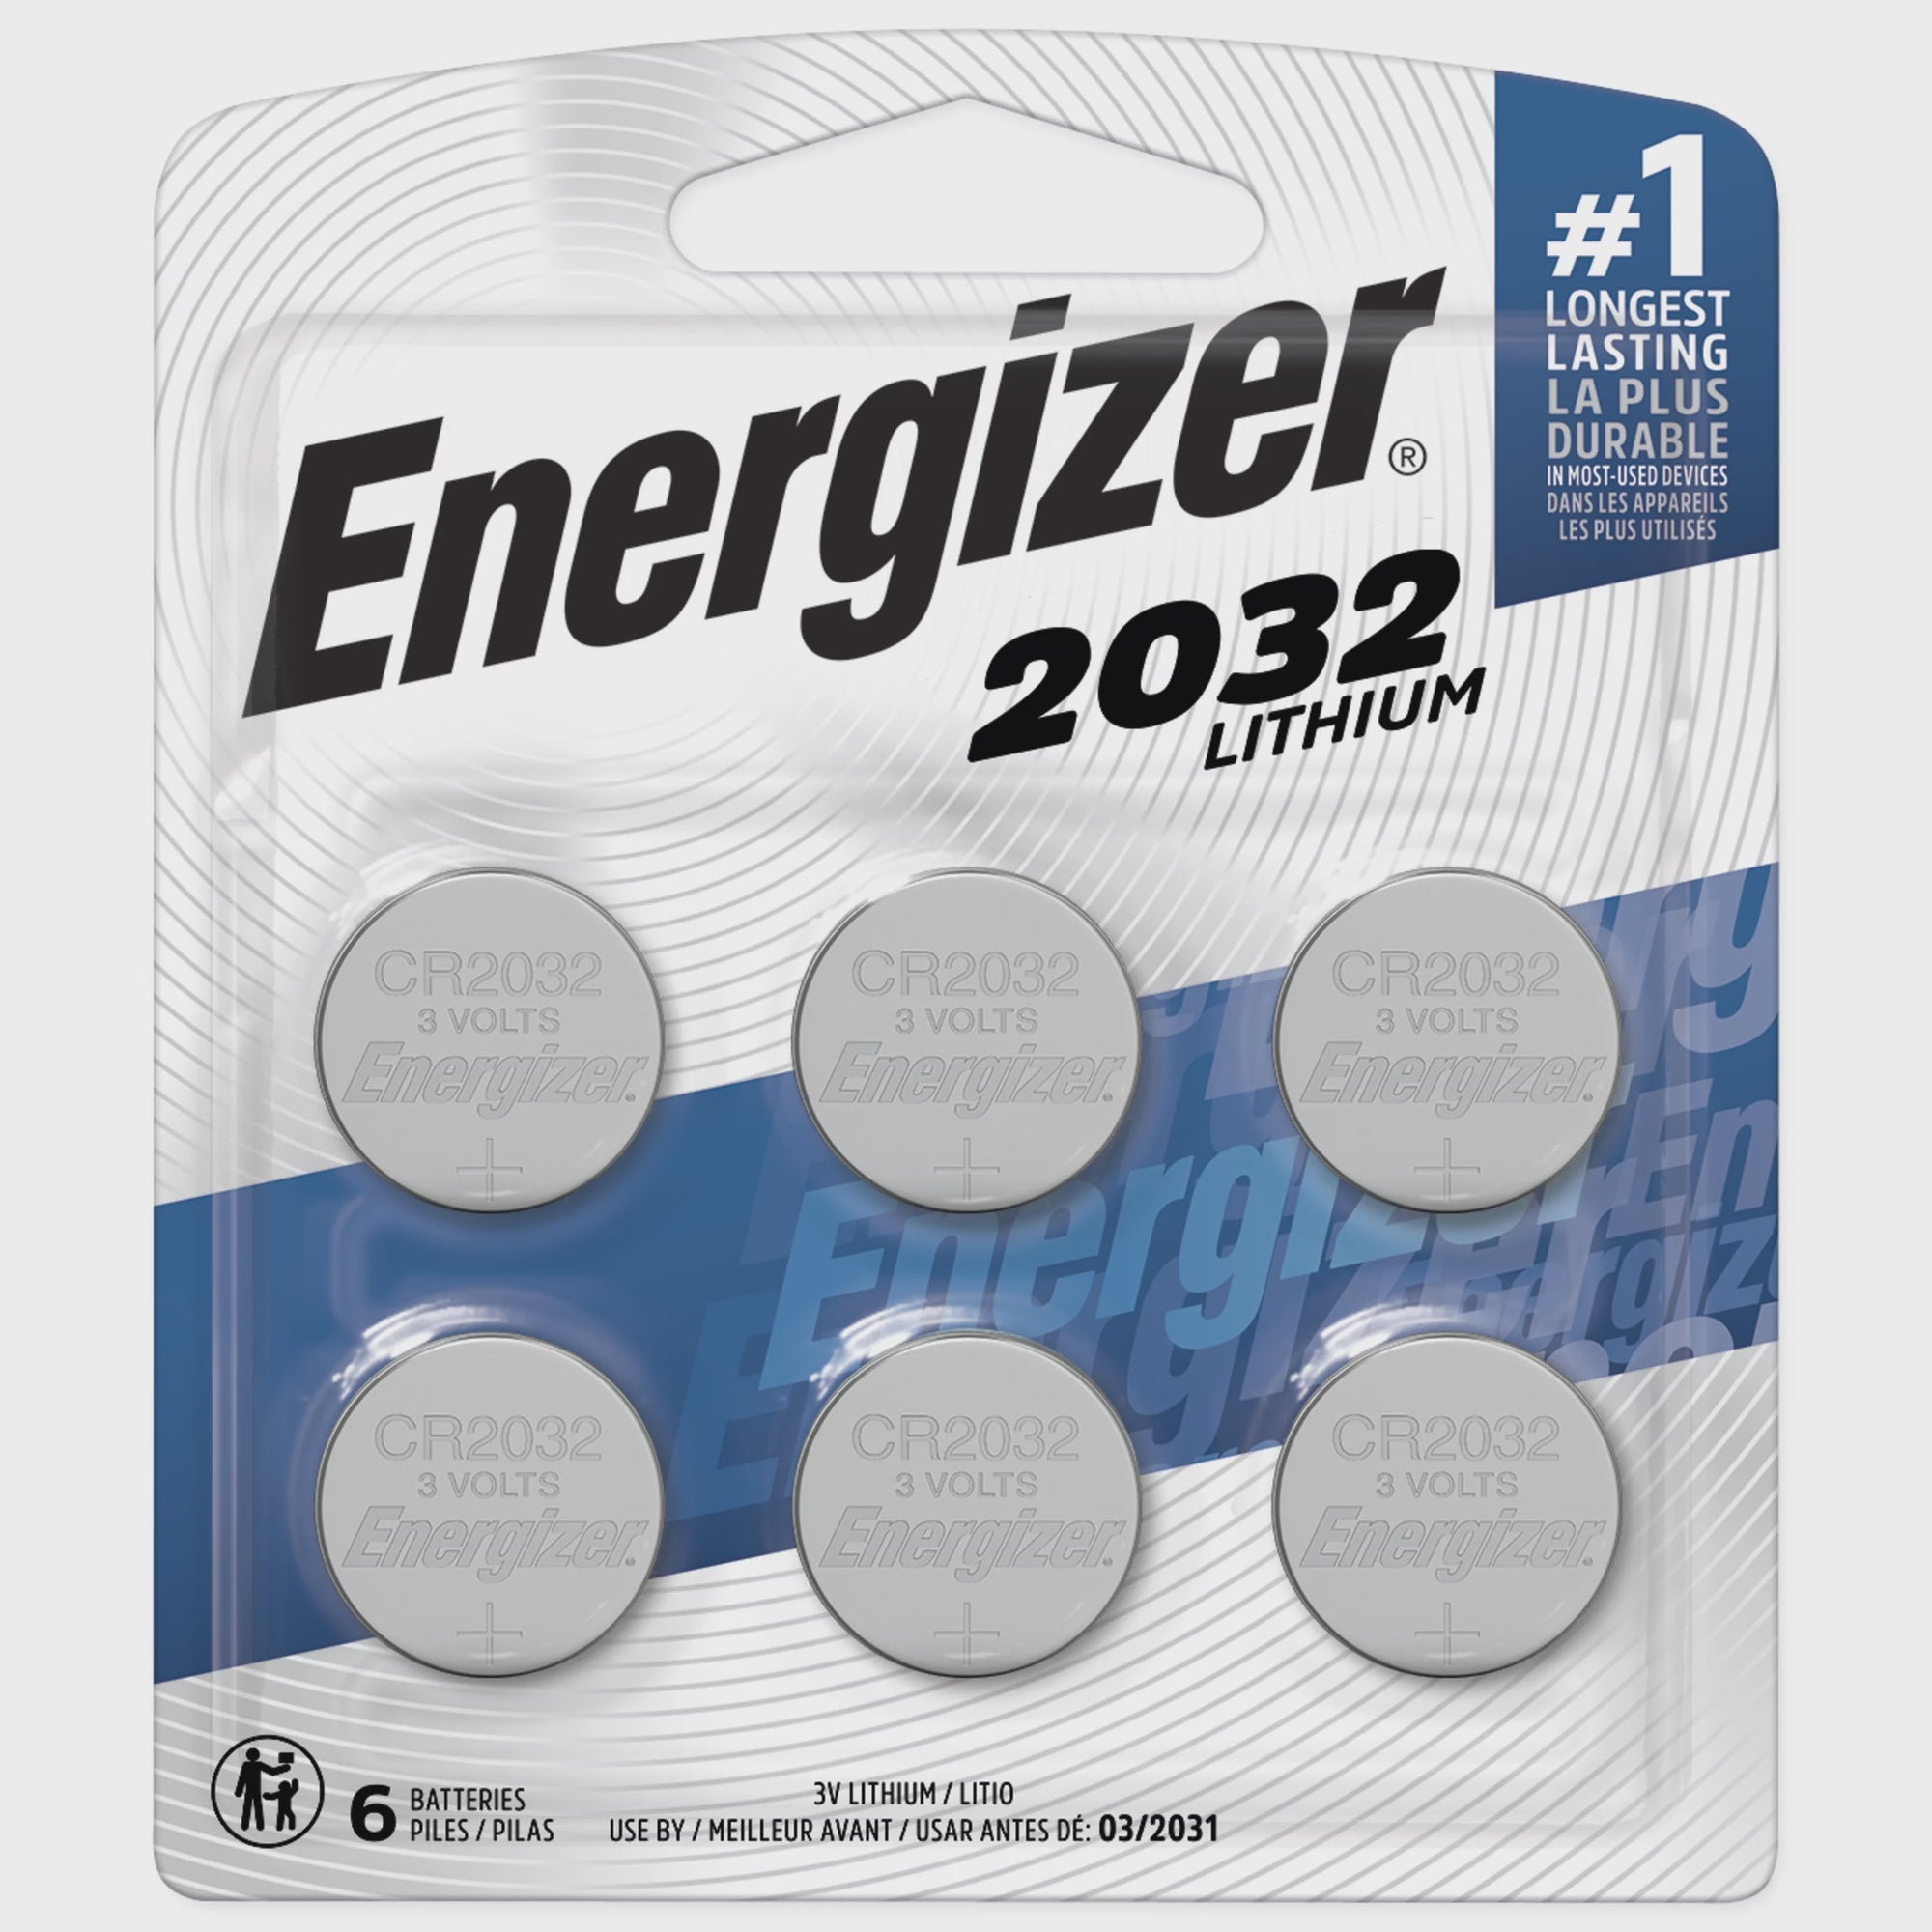 Energizer 2032 Lithium Coin Battery 6ct